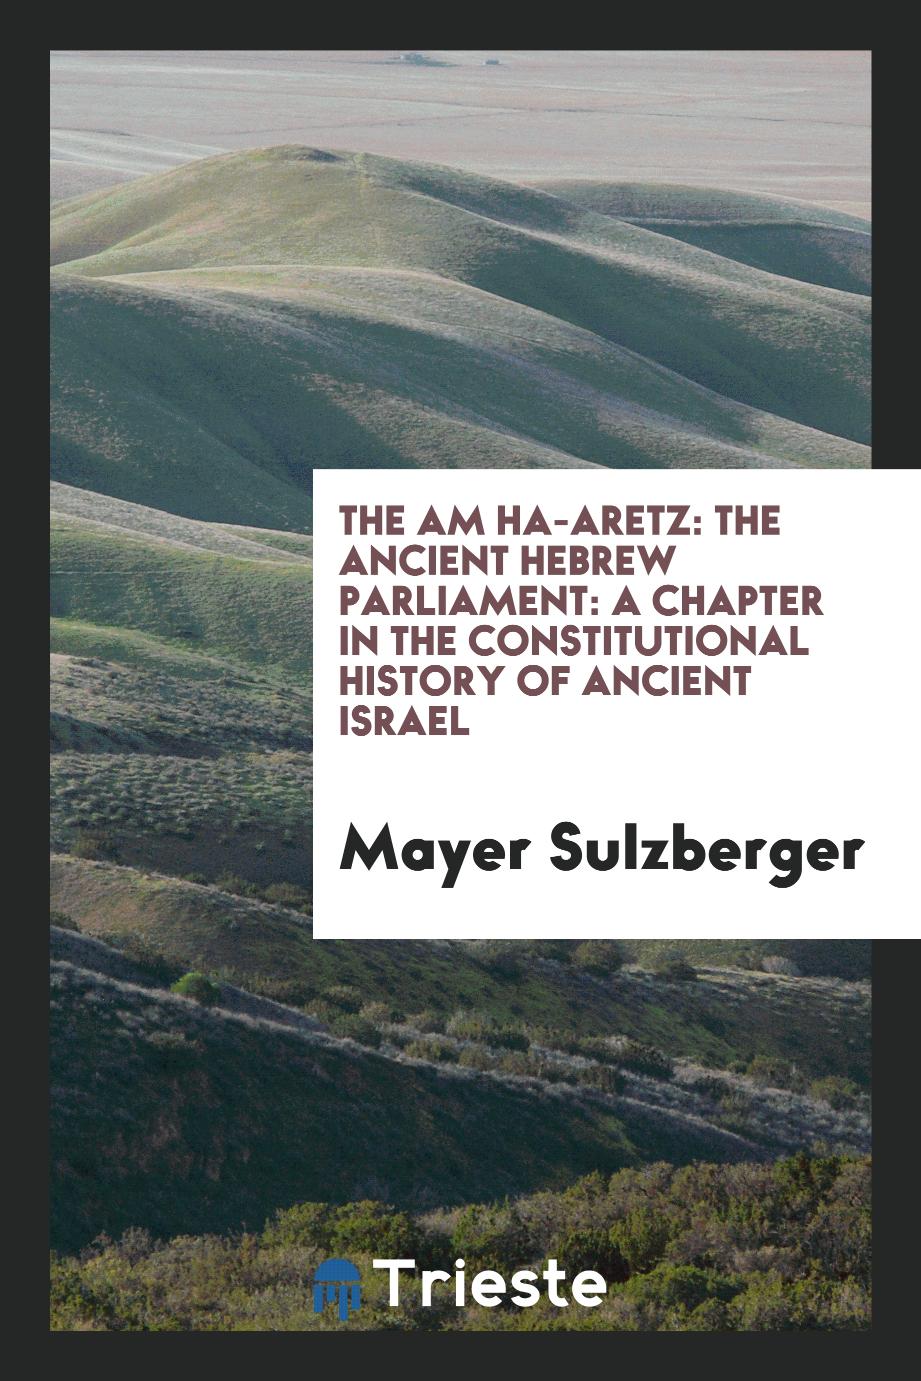 The am ha-aretz: the ancient Hebrew parliament: a chapter in the constitutional history of ancient Israel